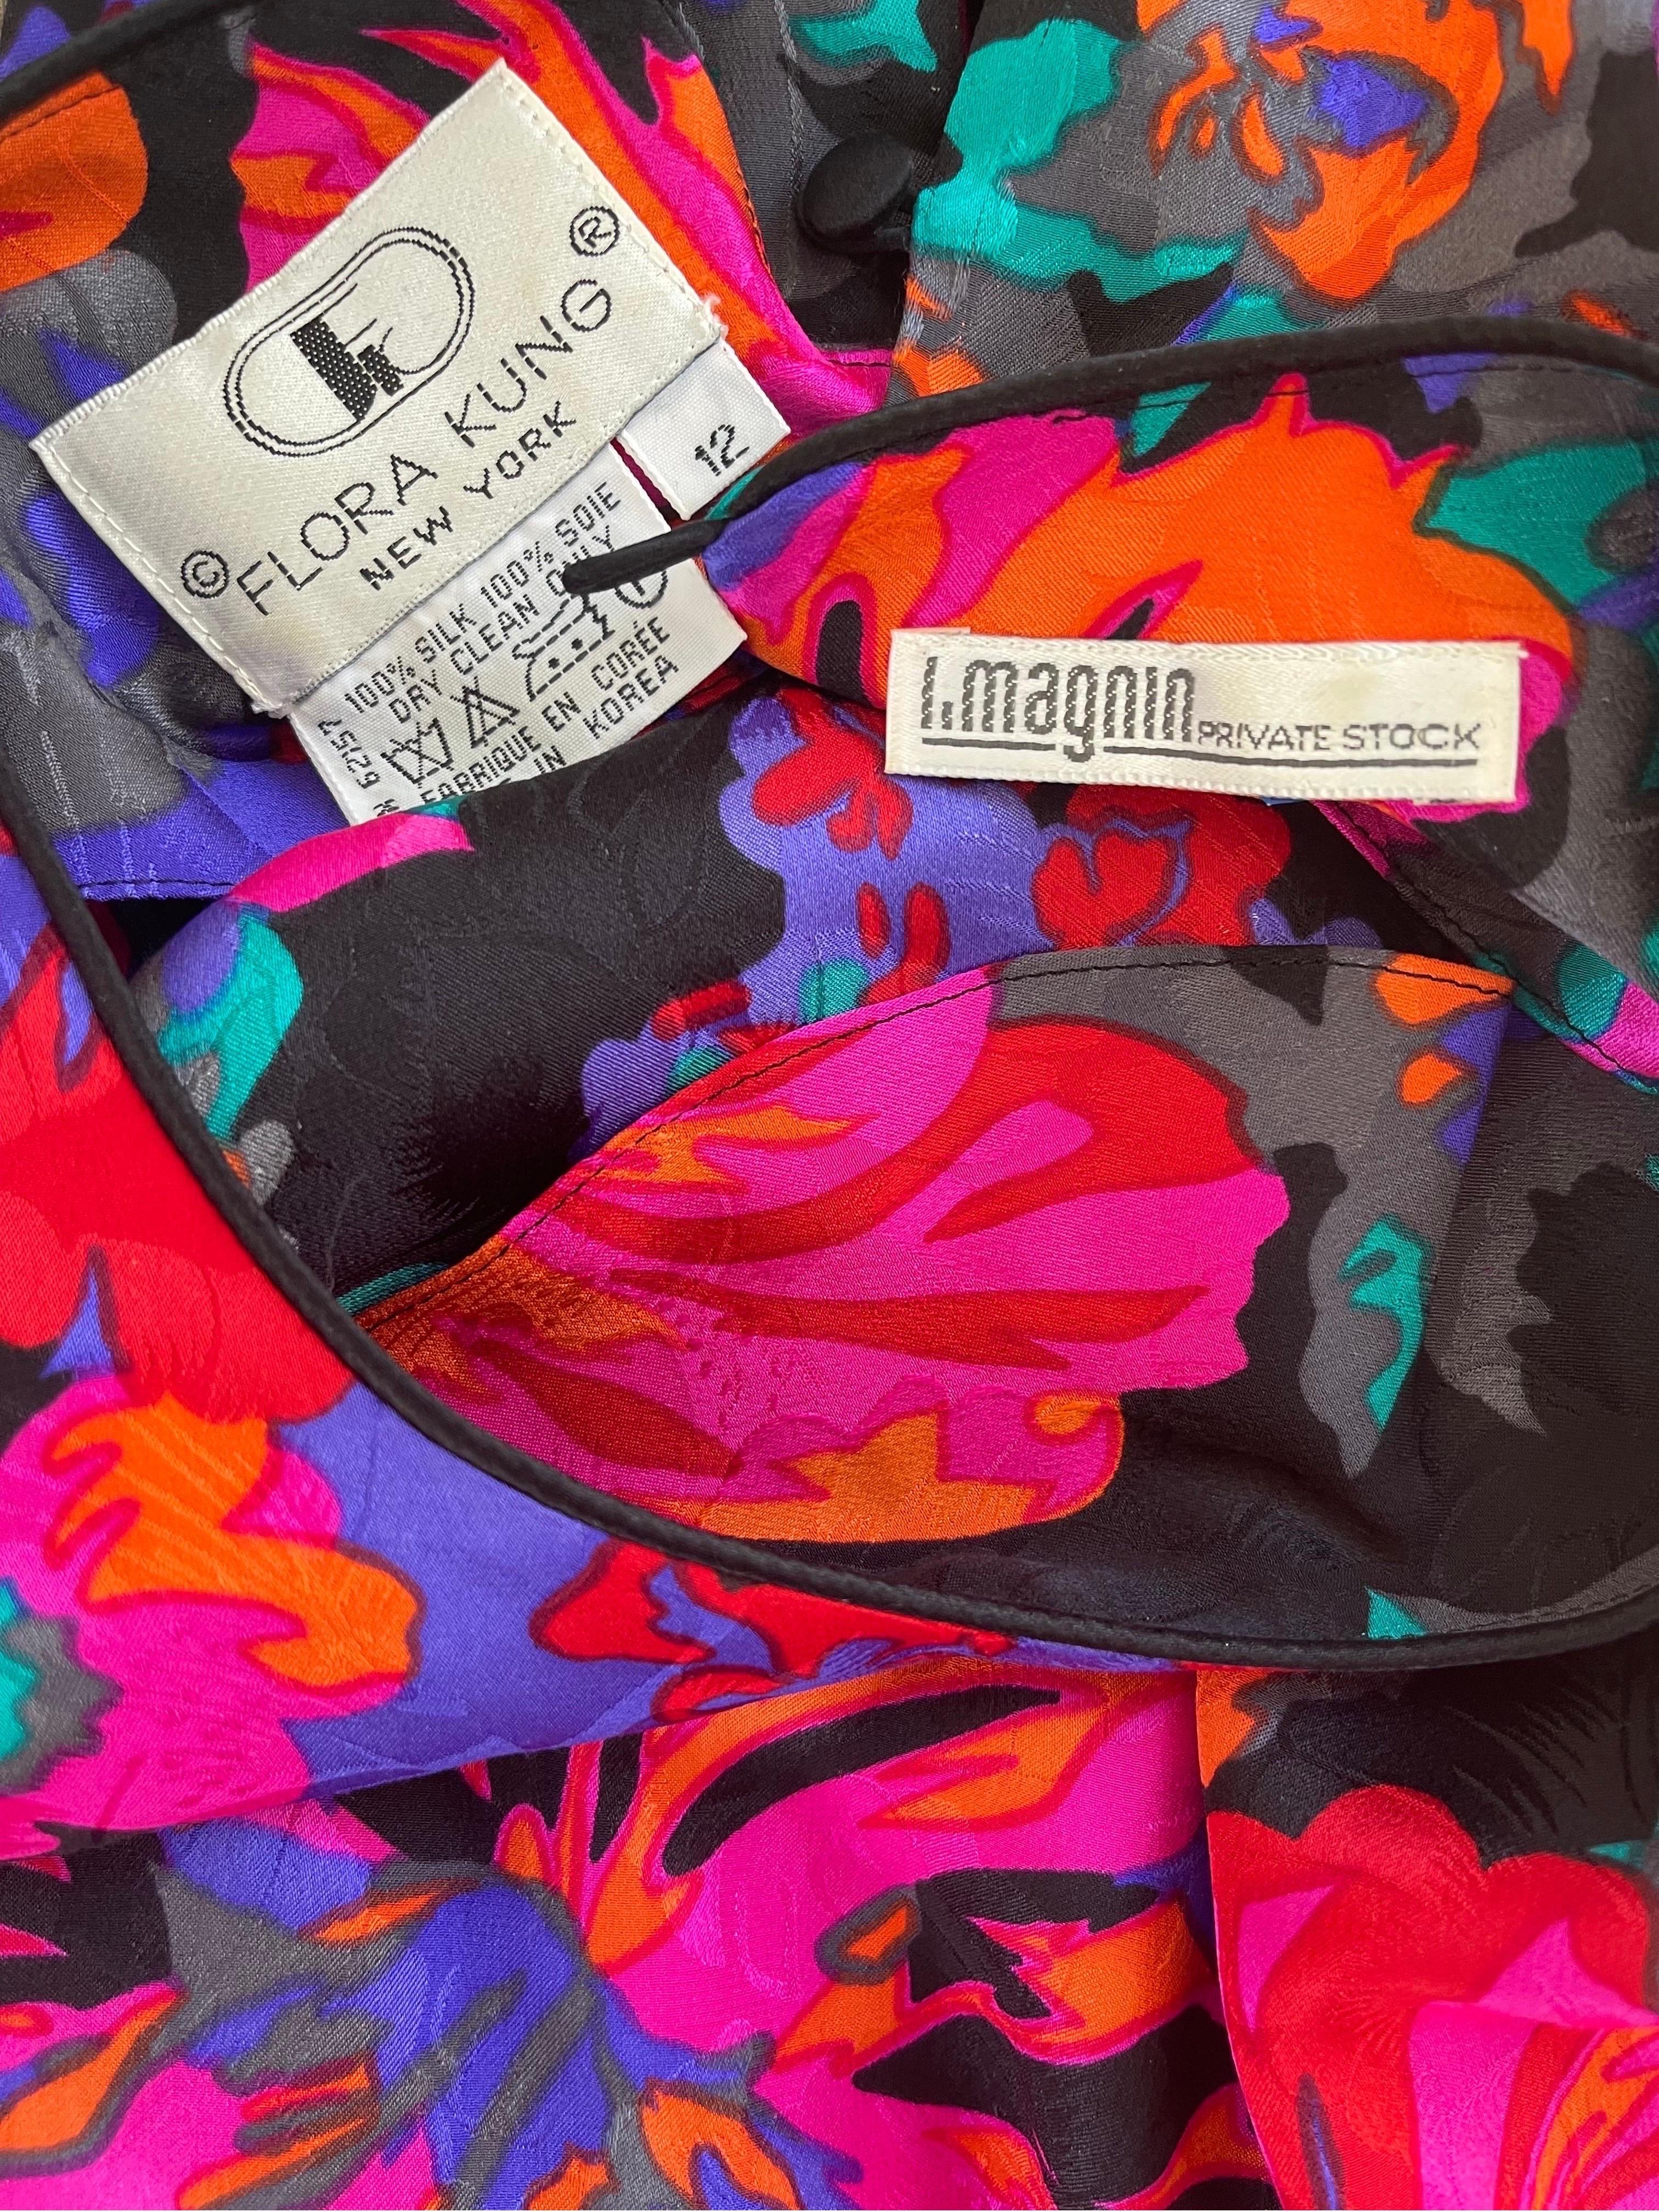 Beautiul vintage 70s FLORA KING for I Magnin Hawaiian print silk blouse ! Vibrant colors of purple, blue, orange, turquoise blue, pink and black throughout. Buttons up the back at neck. 
In great condition
Marked Size 12
Measurements:
40-42 inch